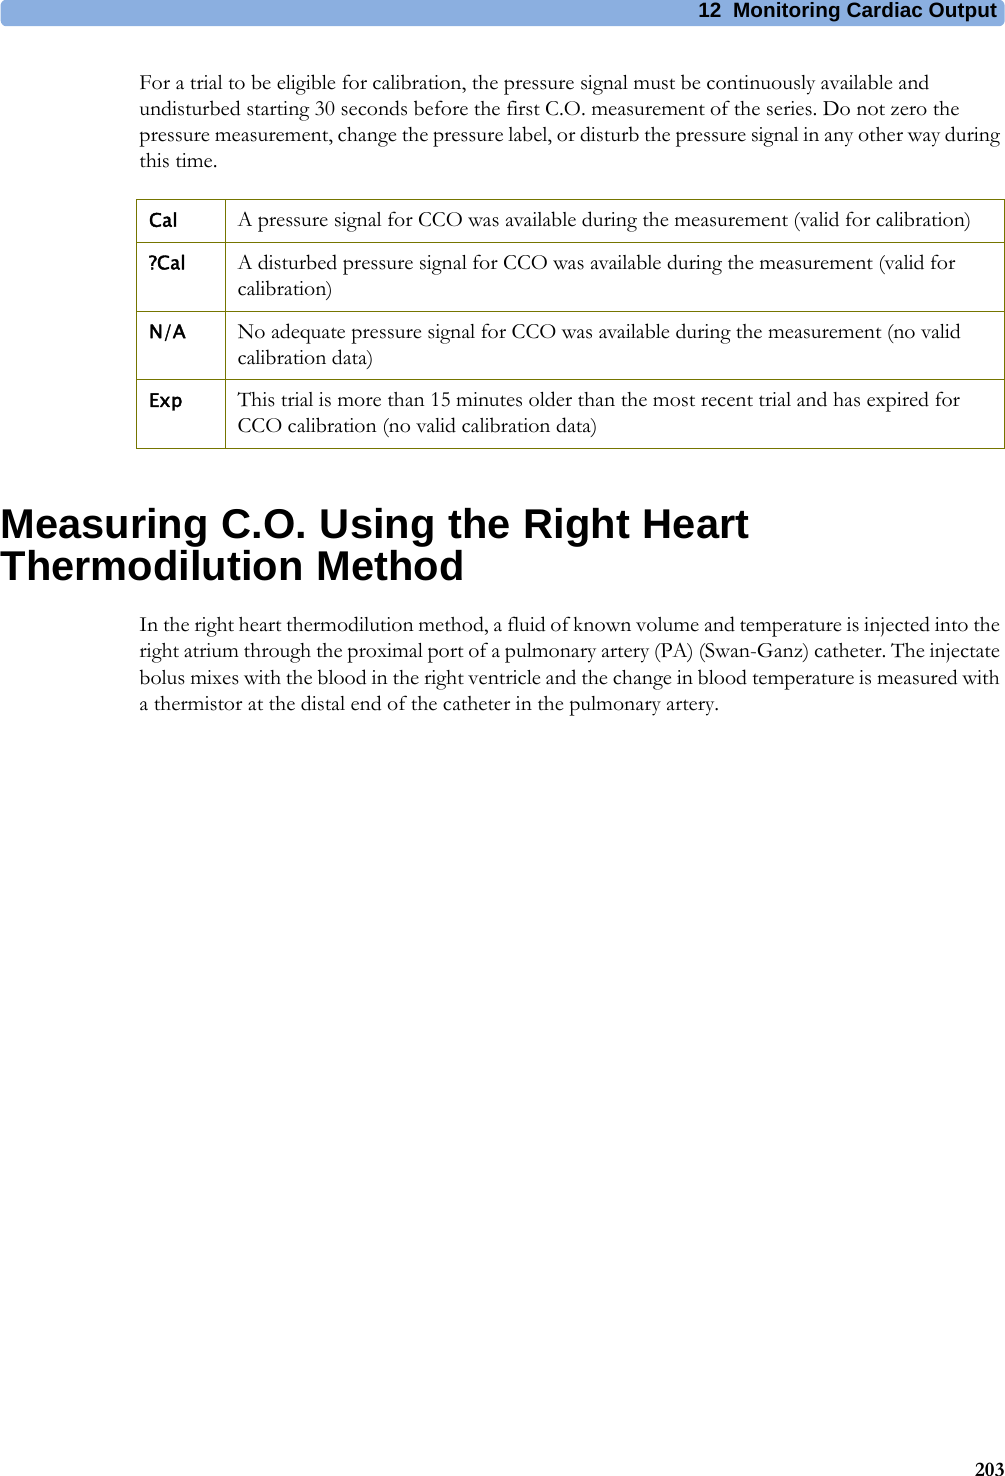 12 Monitoring Cardiac Output203For a trial to be eligible for calibration, the pressure signal must be continuously available and undisturbed starting 30 seconds before the first C.O. measurement of the series. Do not zero the pressure measurement, change the pressure label, or disturb the pressure signal in any other way during this time.Measuring C.O. Using the Right Heart Thermodilution MethodIn the right heart thermodilution method, a fluid of known volume and temperature is injected into the right atrium through the proximal port of a pulmonary artery (PA) (Swan-Ganz) catheter. The injectate bolus mixes with the blood in the right ventricle and the change in blood temperature is measured with a thermistor at the distal end of the catheter in the pulmonary artery.Cal A pressure signal for CCO was available during the measurement (valid for calibration)?Cal A disturbed pressure signal for CCO was available during the measurement (valid for calibration)N/A No adequate pressure signal for CCO was available during the measurement (no valid calibration data)Exp This trial is more than 15 minutes older than the most recent trial and has expired for CCO calibration (no valid calibration data)